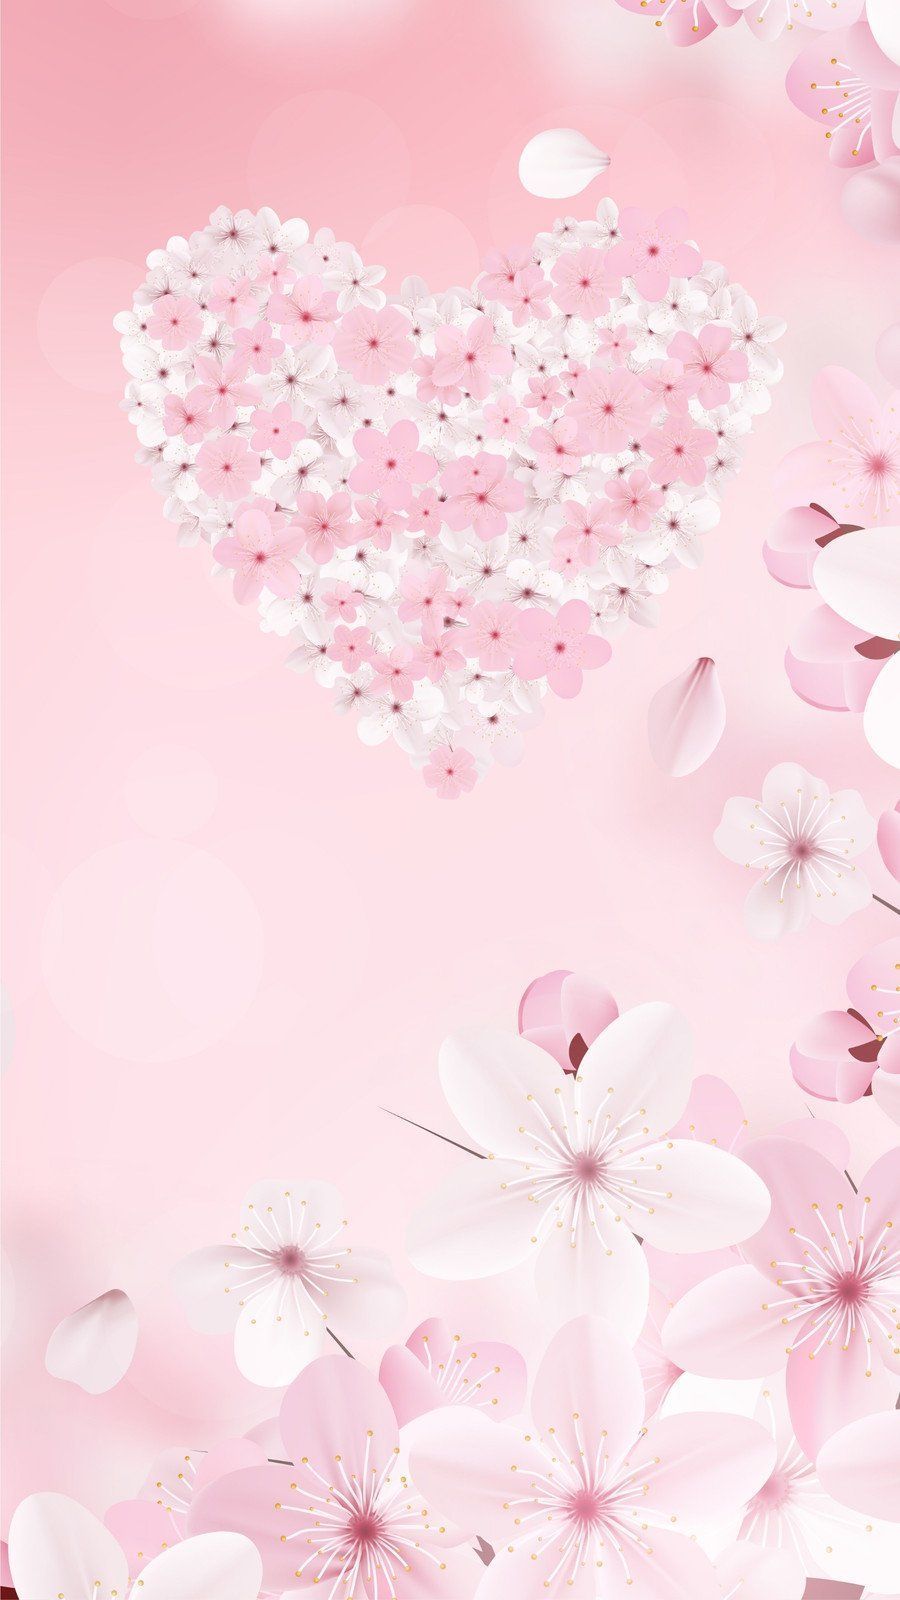 A pink heart surrounded by white and pink flowers - Spring, pink phone